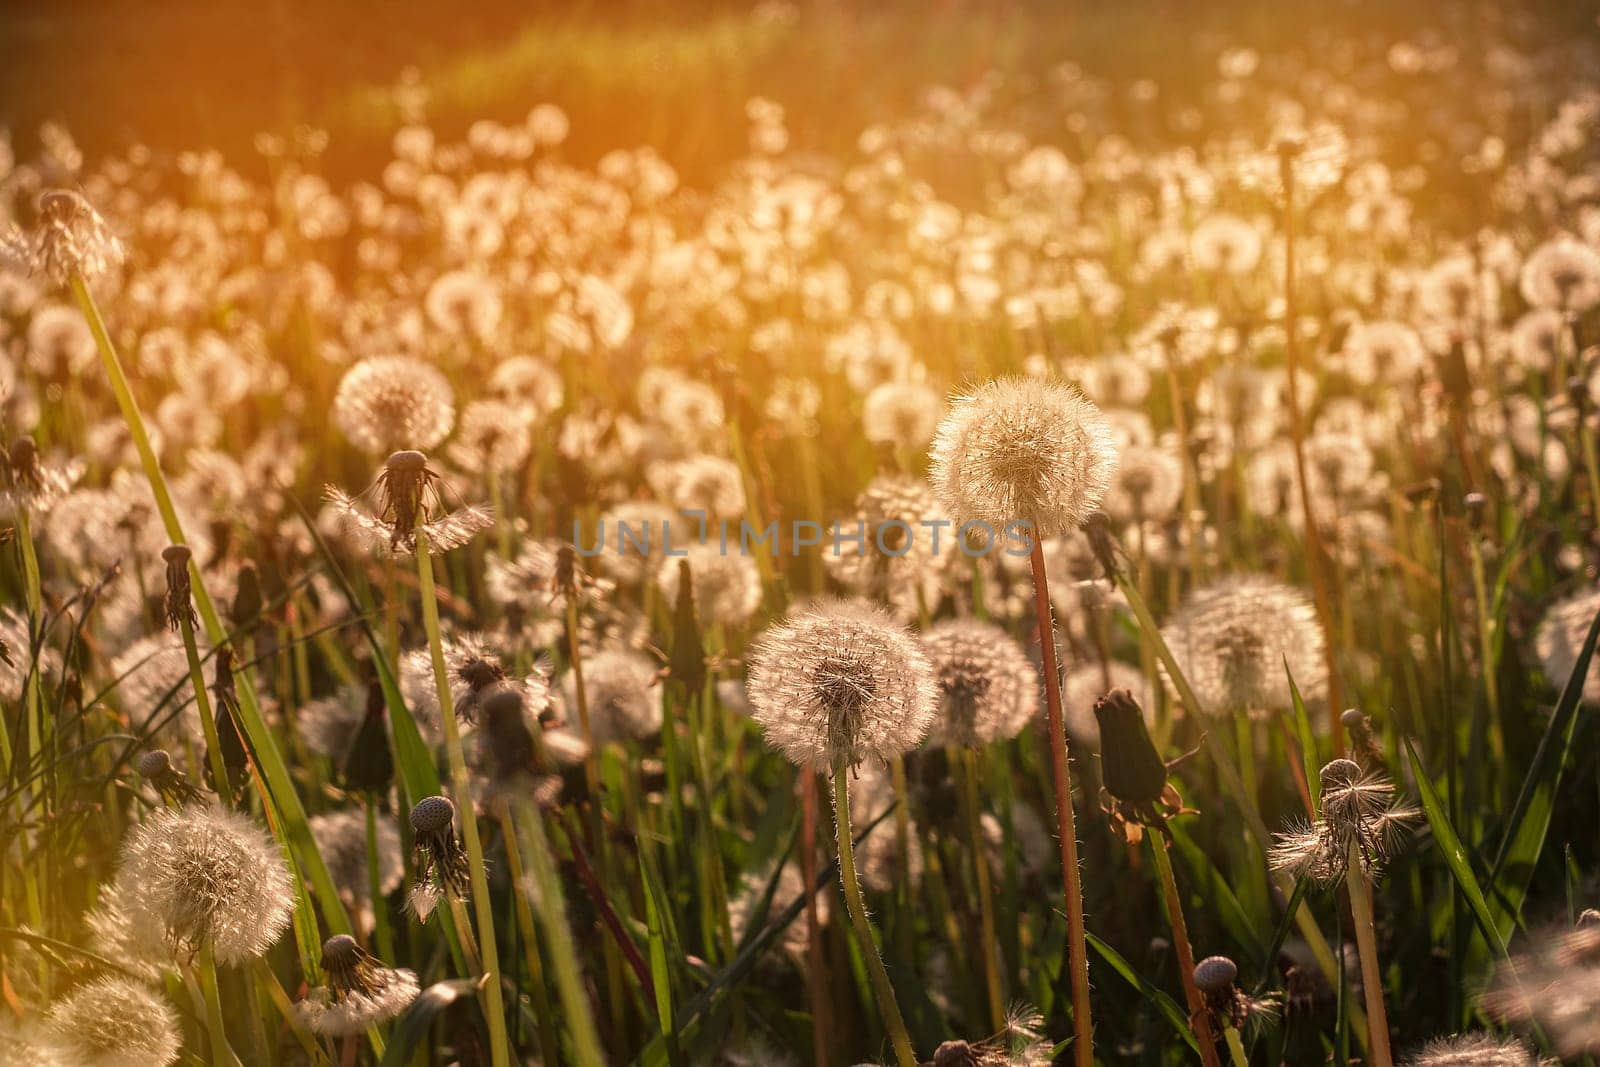 Fluffy dandelions glow in the rays of sunlight at sunset in the field.